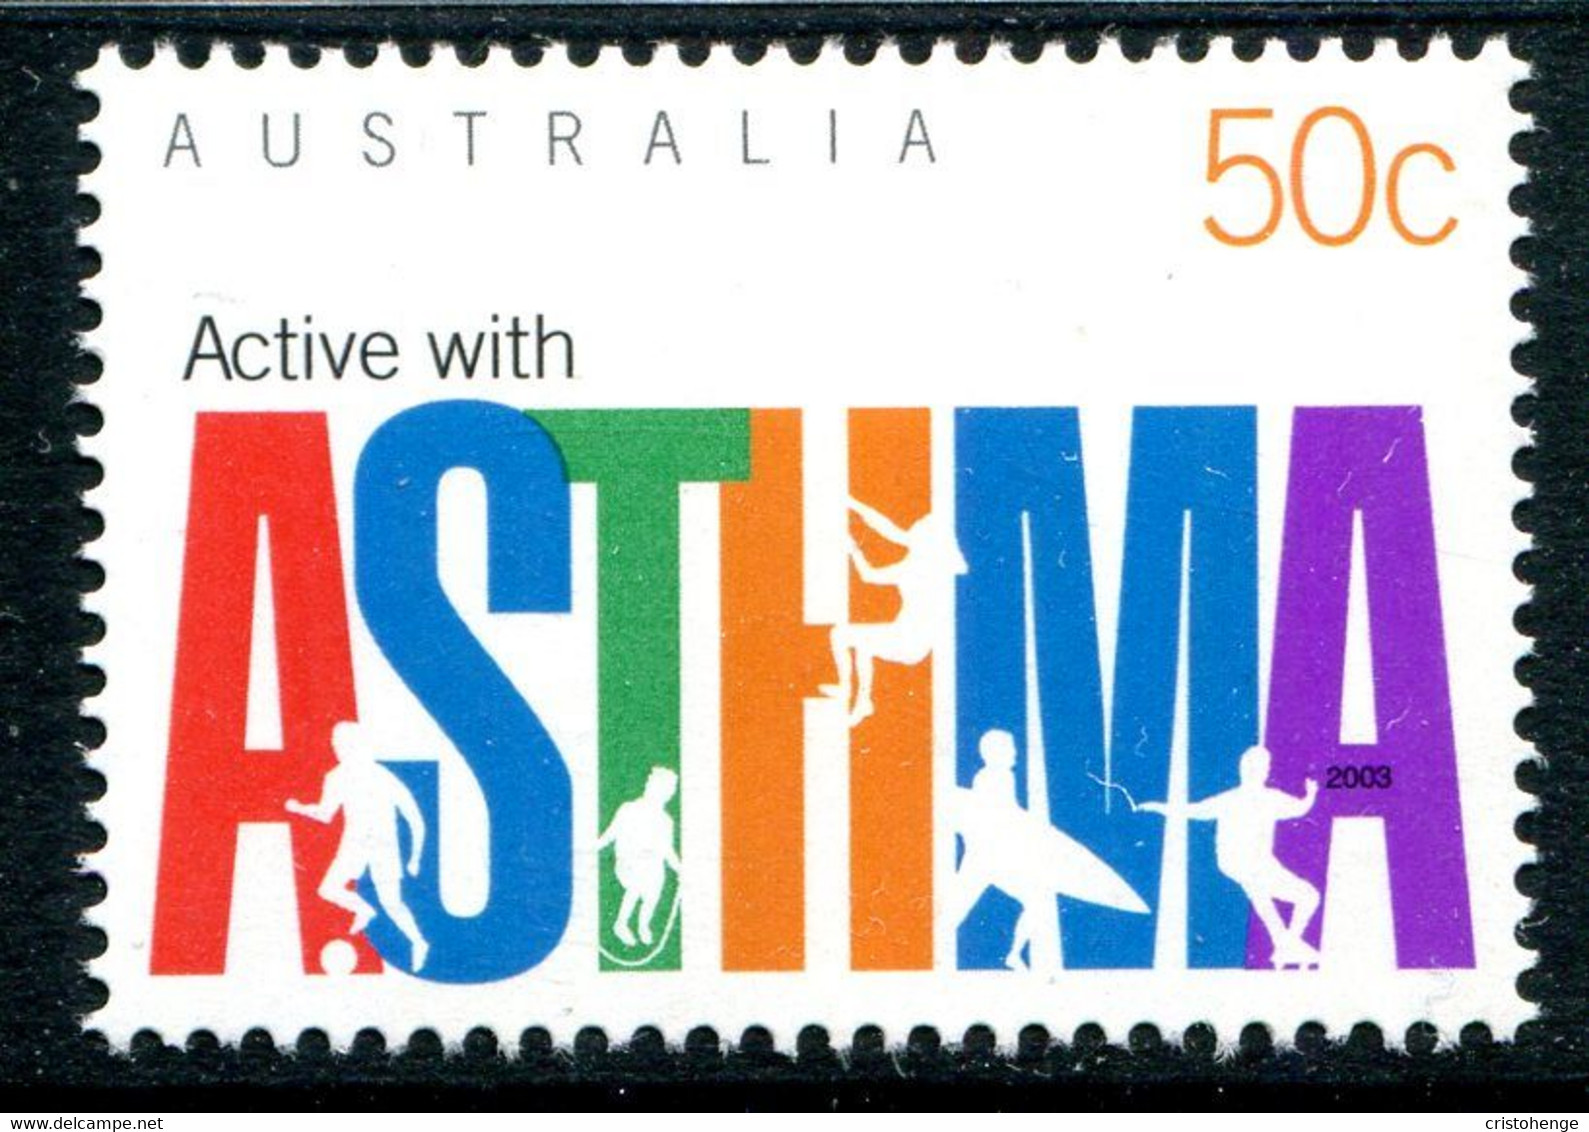 Australia 2003 National Asthma Week Campaign MNH (SG 2343) - Mint Stamps